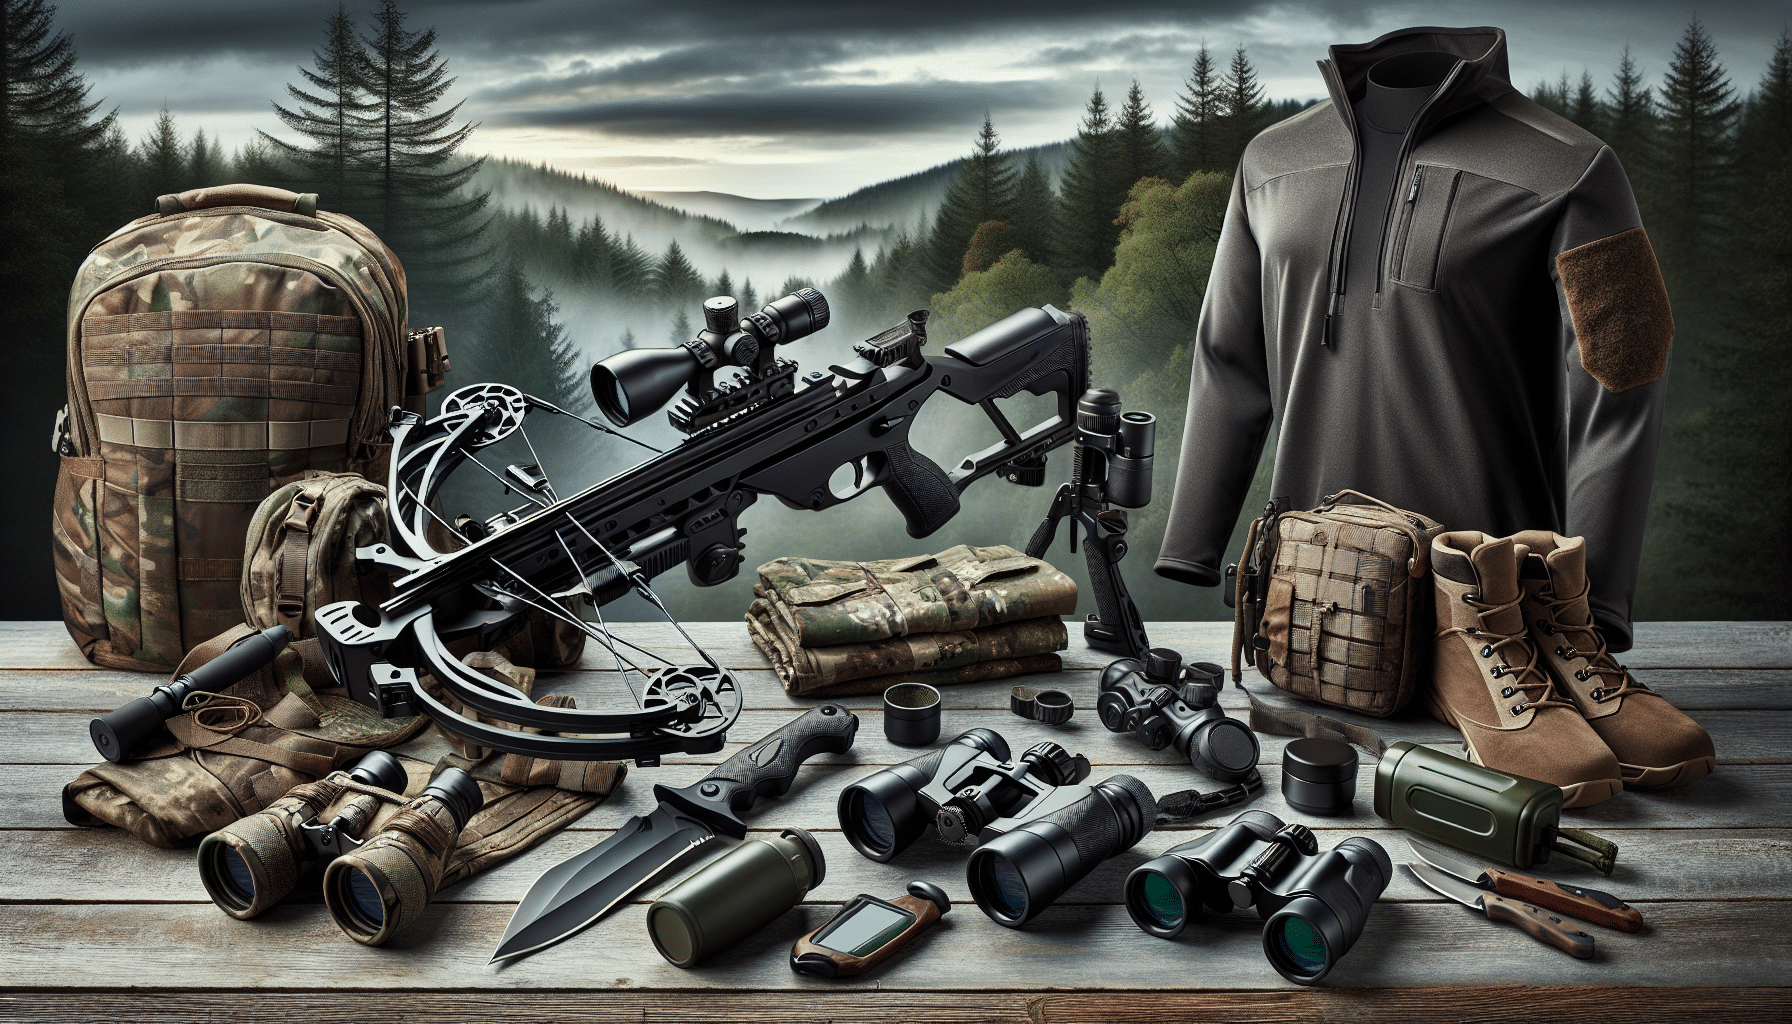 A showcase of tactical hunting gear without any specific brand names or logos. The image features a variety of items essential for hunting such as a sleek, matte black crossbow, high-quality camouflage clothing neatly arranged, binoculars with ergonomic design, a sturdy hunting knife with a non-reflective blade, and a set of practical camping equipment like lightweight tents, compact cooking gear, and portable water filtration systems. In the background, a serene forest scenery provides context to the hunting gear. Note: No people or text are included in this image.